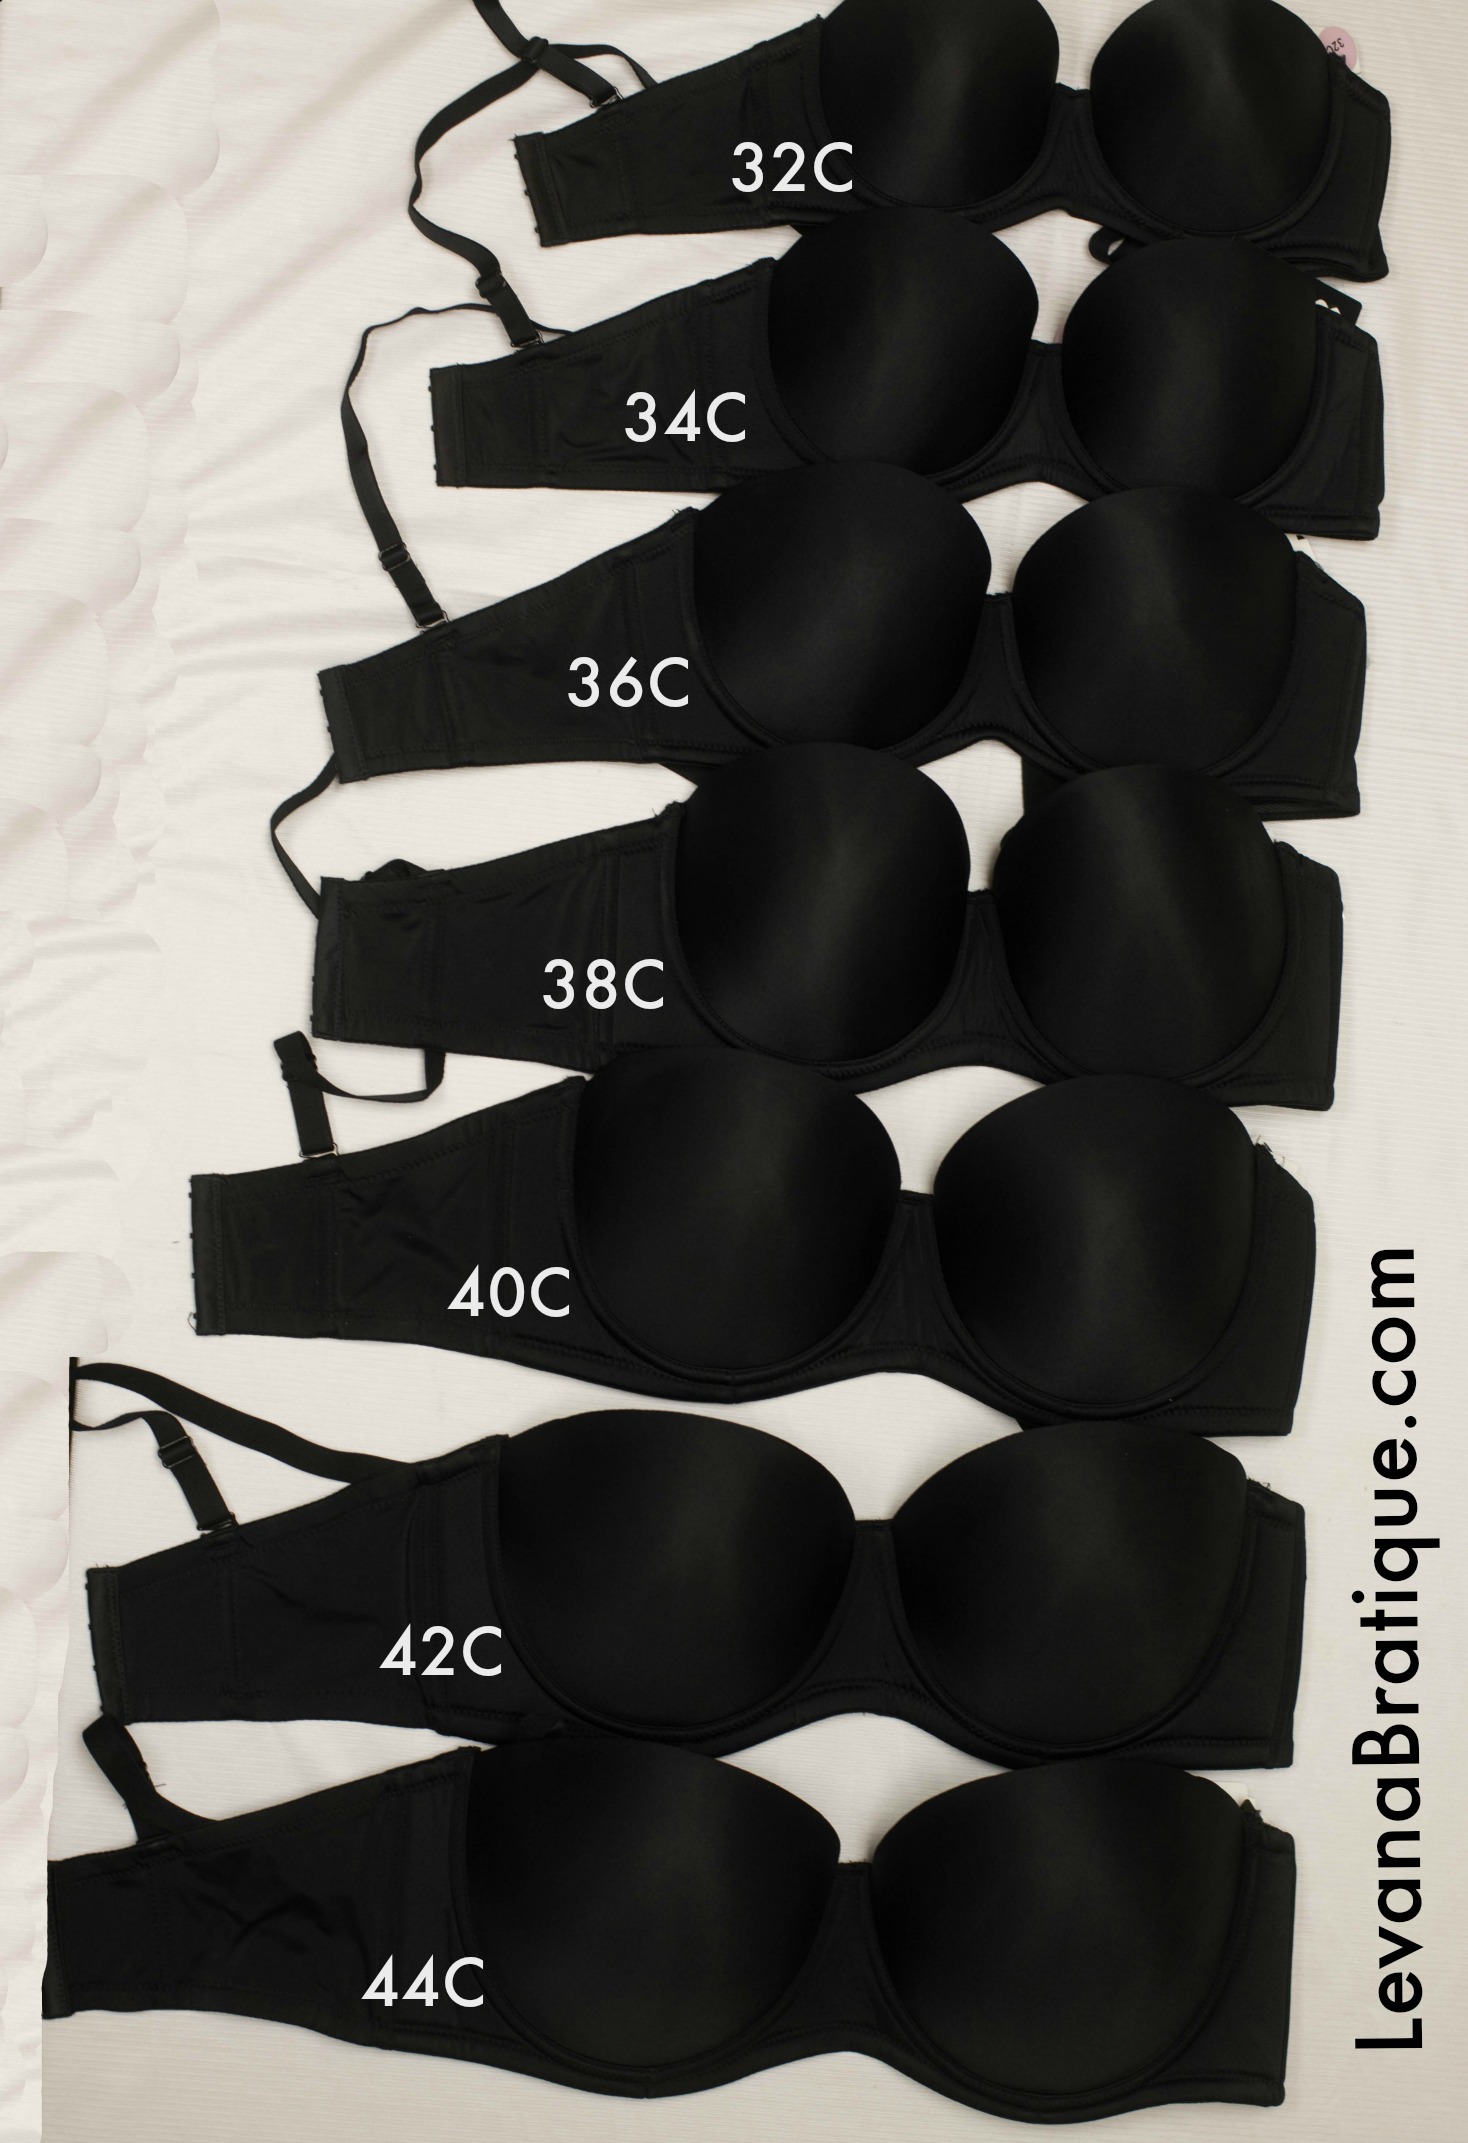 32c Bra Size - All to Know About 32c Breast